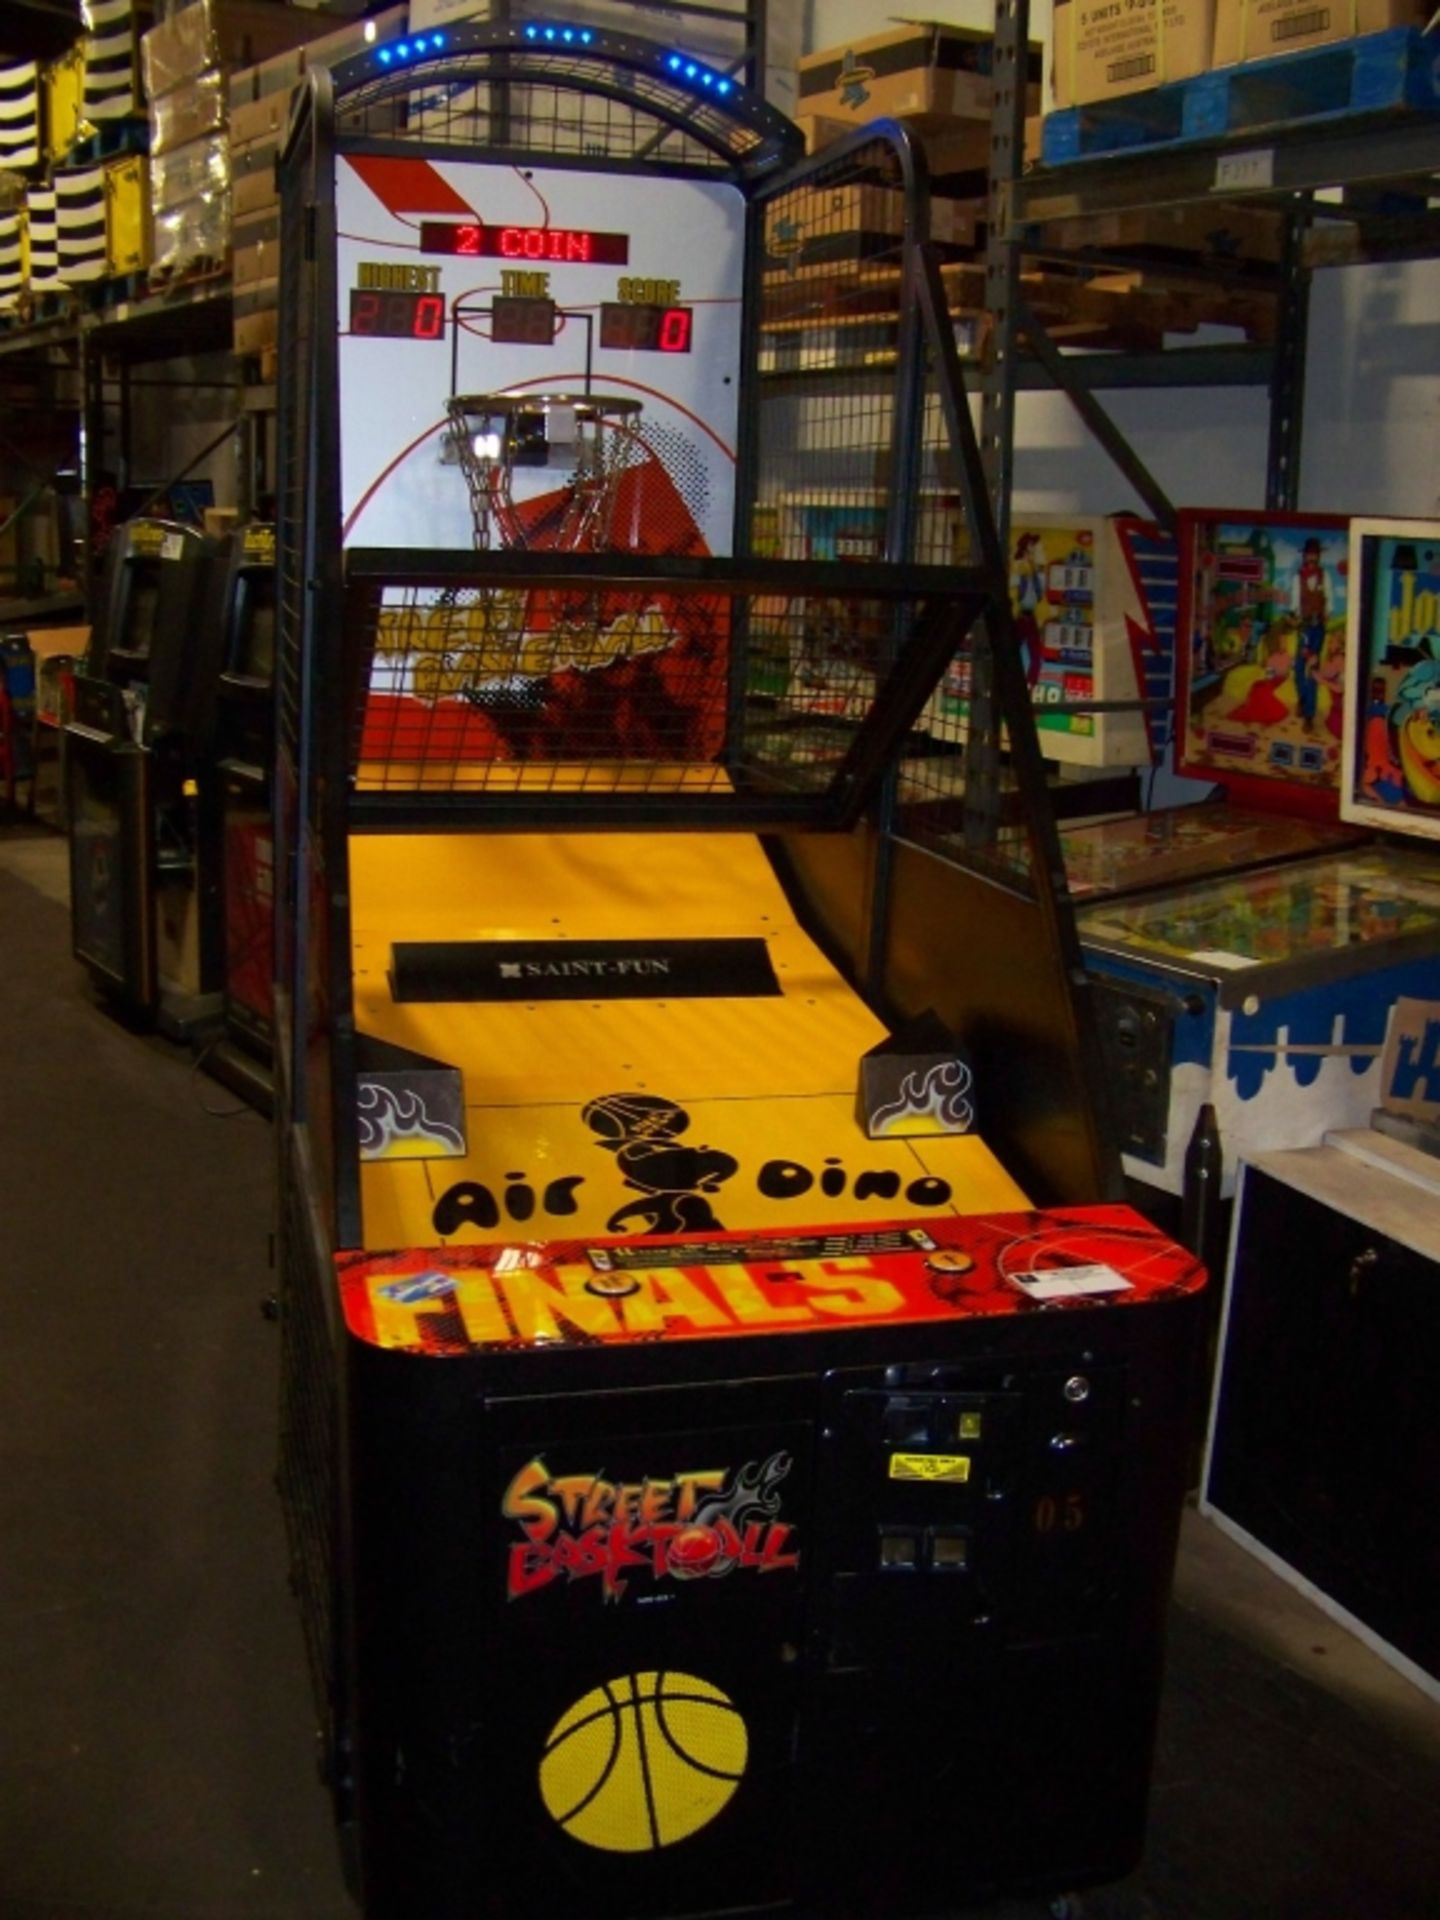 STREET BASKETBALL SPORTS REDEMPTION ARCADE GAME Item is in used condition. Evidence of wear and - Image 4 of 7